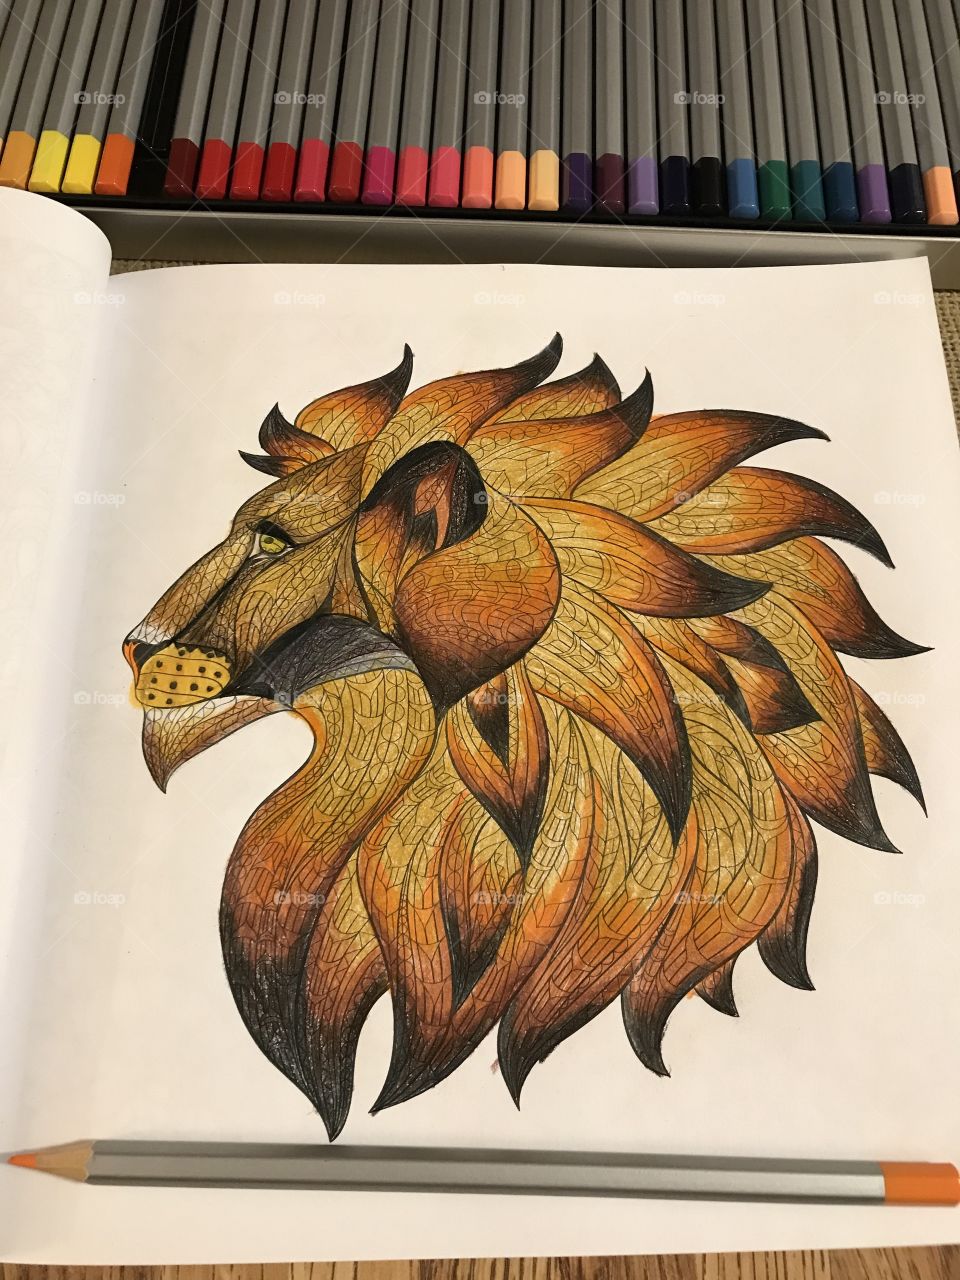 Coloring is so relaxing 